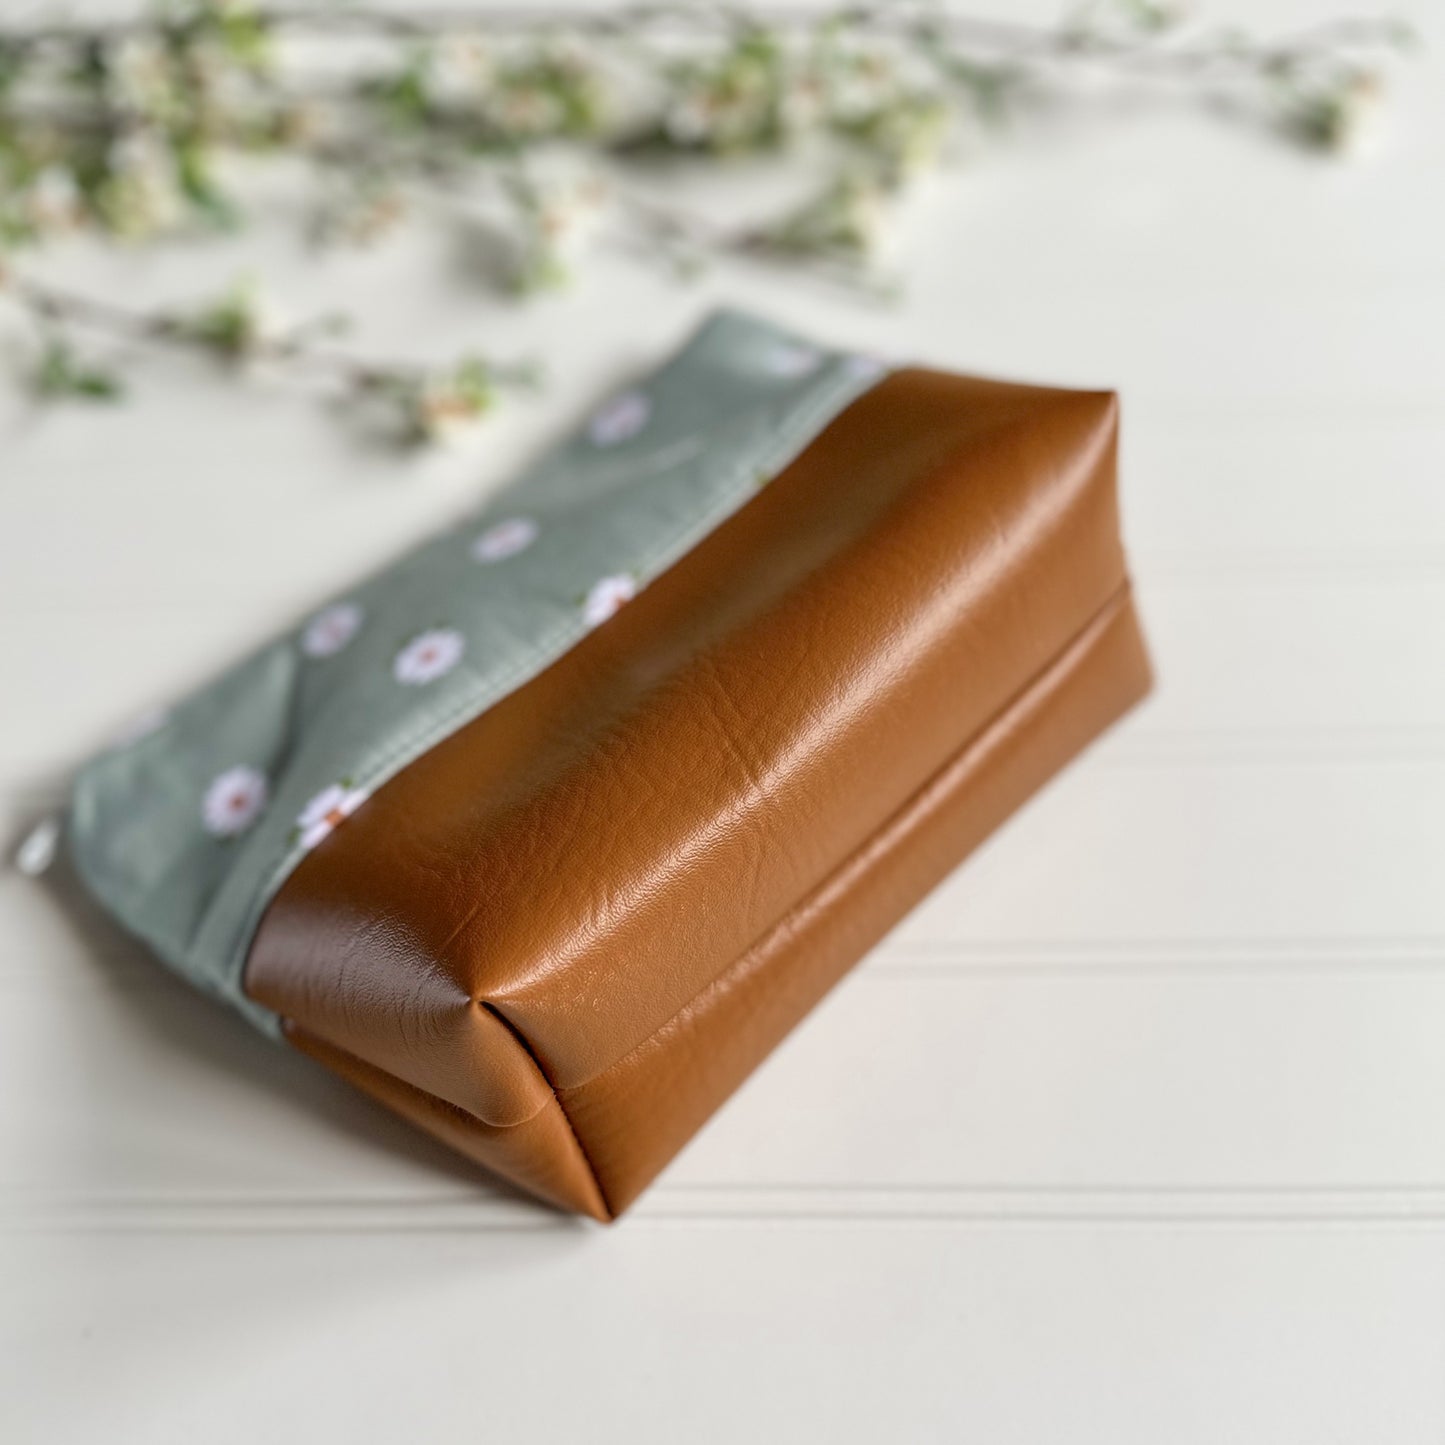 Sage Green Daisy and Leather Pouch